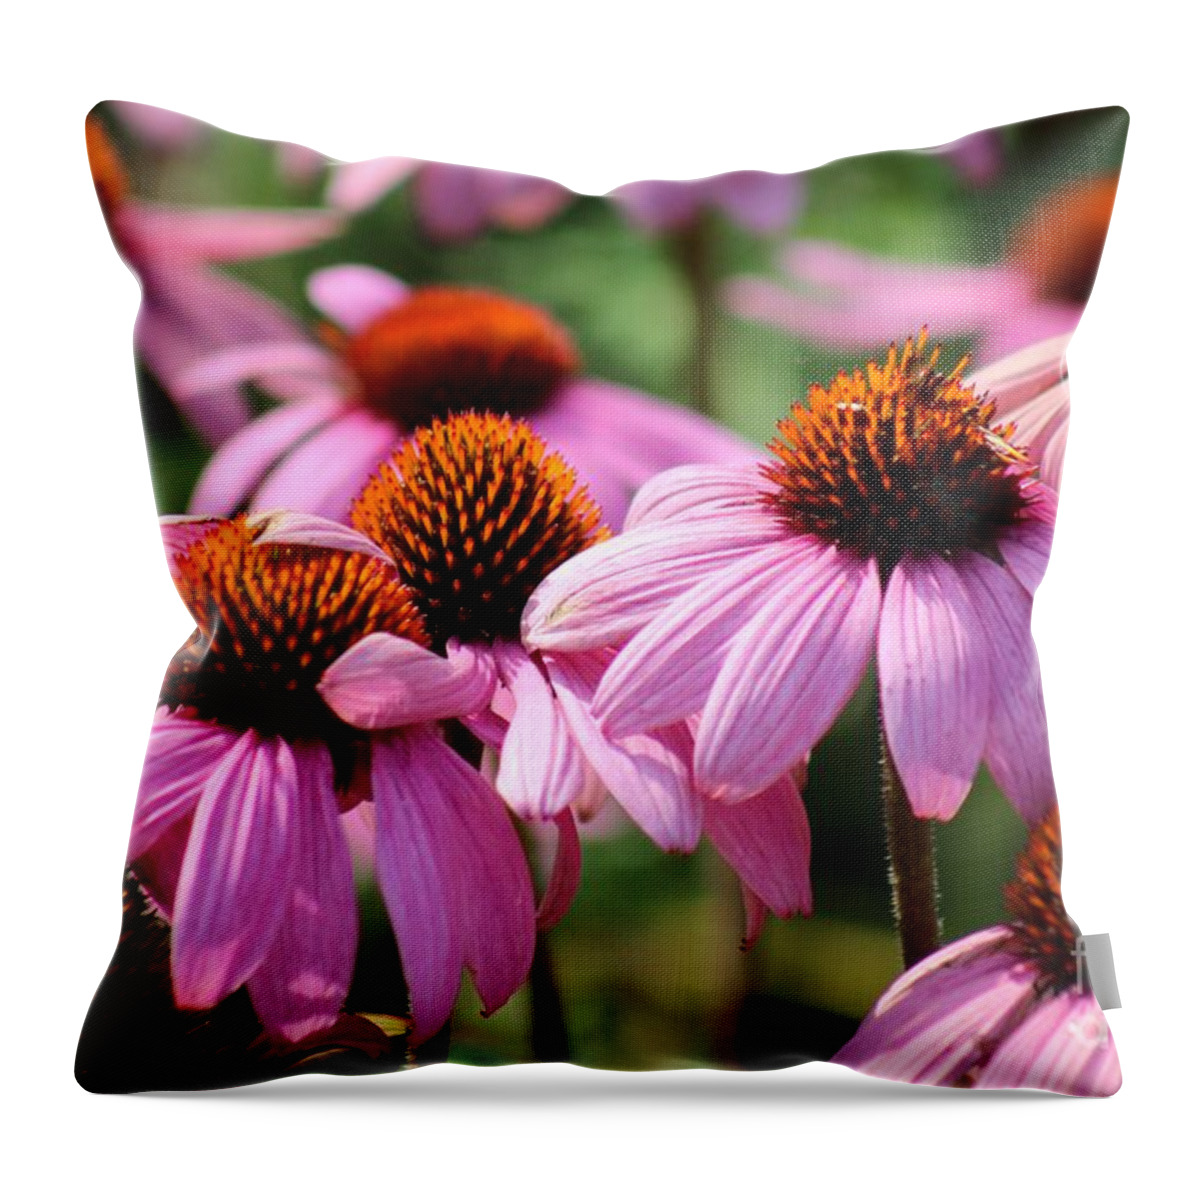 Pink Throw Pillow featuring the photograph Nature's Beauty 97 by Deena Withycombe